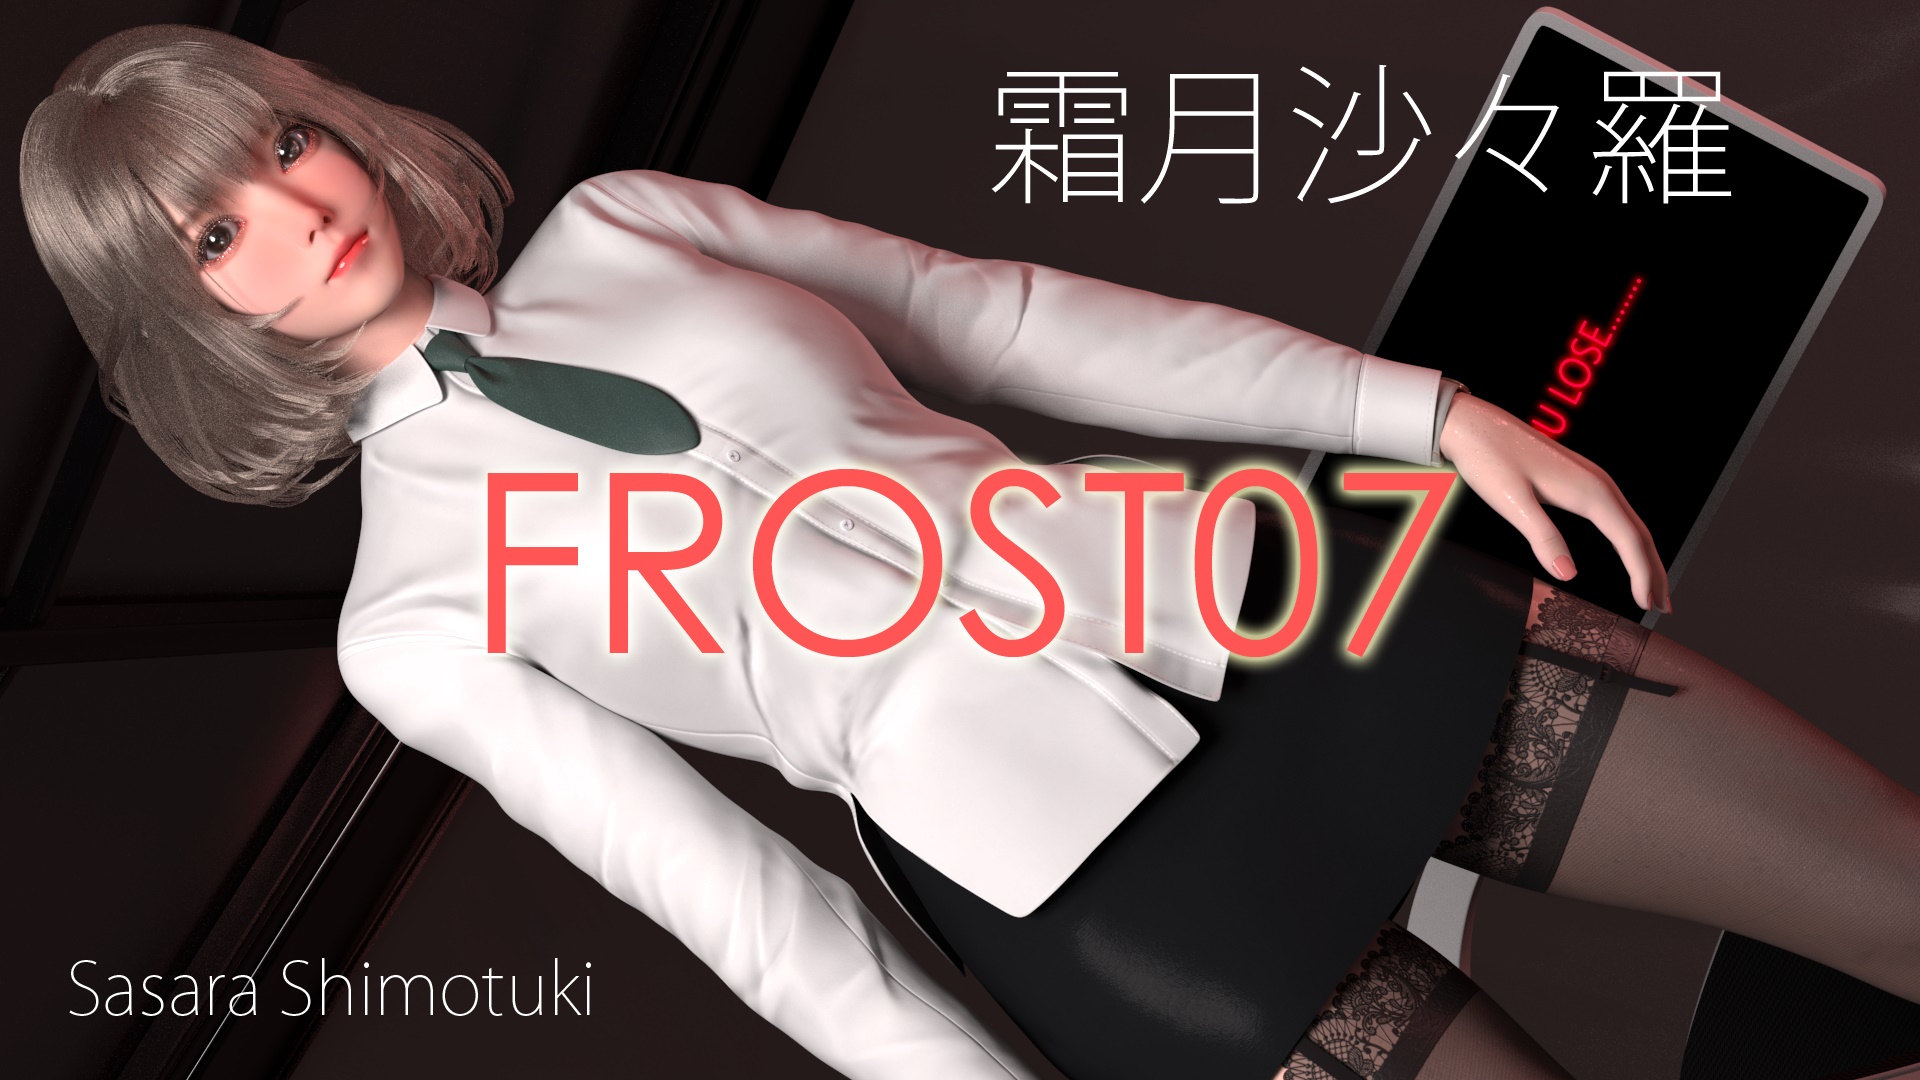 FROST07 [A Third Dimension / ATD]